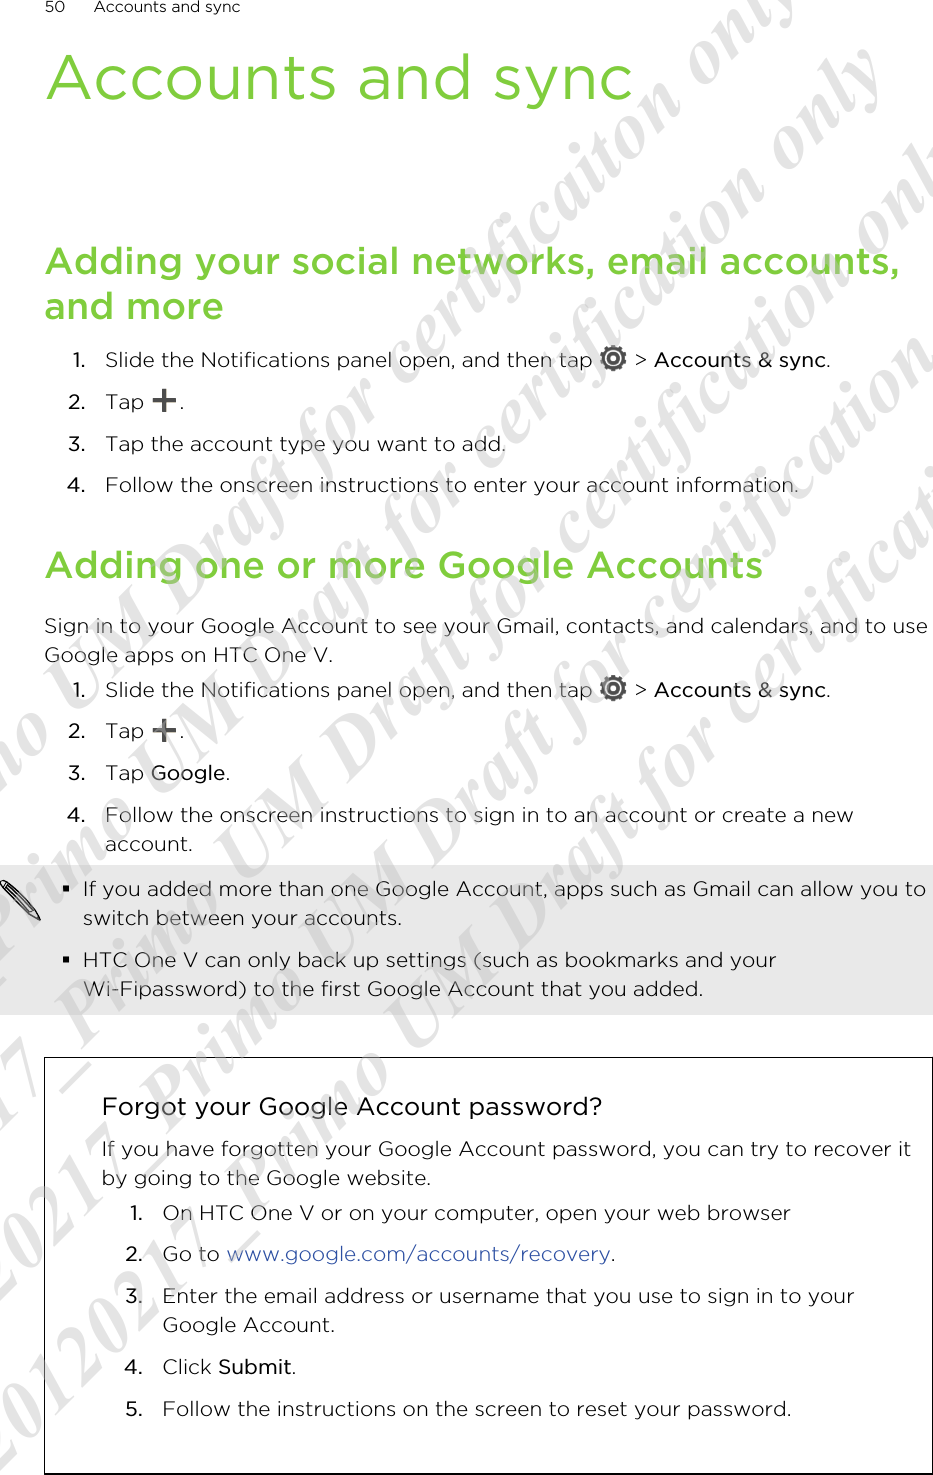 Accounts and syncAdding your social networks, email accounts,and more1. Slide the Notifications panel open, and then tap   &gt; Accounts &amp; sync.2. Tap  .3. Tap the account type you want to add.4. Follow the onscreen instructions to enter your account information.Adding one or more Google AccountsSign in to your Google Account to see your Gmail, contacts, and calendars, and to useGoogle apps on HTC One V.1. Slide the Notifications panel open, and then tap   &gt; Accounts &amp; sync.2. Tap  .3. Tap Google.4. Follow the onscreen instructions to sign in to an account or create a newaccount.§If you added more than one Google Account, apps such as Gmail can allow you toswitch between your accounts.§HTC One V can only back up settings (such as bookmarks and yourWi-Fipassword) to the first Google Account that you added.Forgot your Google Account password?If you have forgotten your Google Account password, you can try to recover itby going to the Google website.1. On HTC One V or on your computer, open your web browser2. Go to www.google.com/accounts/recovery.3. Enter the email address or username that you use to sign in to yourGoogle Account.4. Click Submit.5. Follow the instructions on the screen to reset your password.50 Accounts and sync20120217_Primo UM Draft for certificaiton only 20120217_Primo UM Draft for certification only 20120217_Primo UM Draft for certification only 20120217_Primo UM Draft for certification only 20120217_Primo UM Draft for certification only  